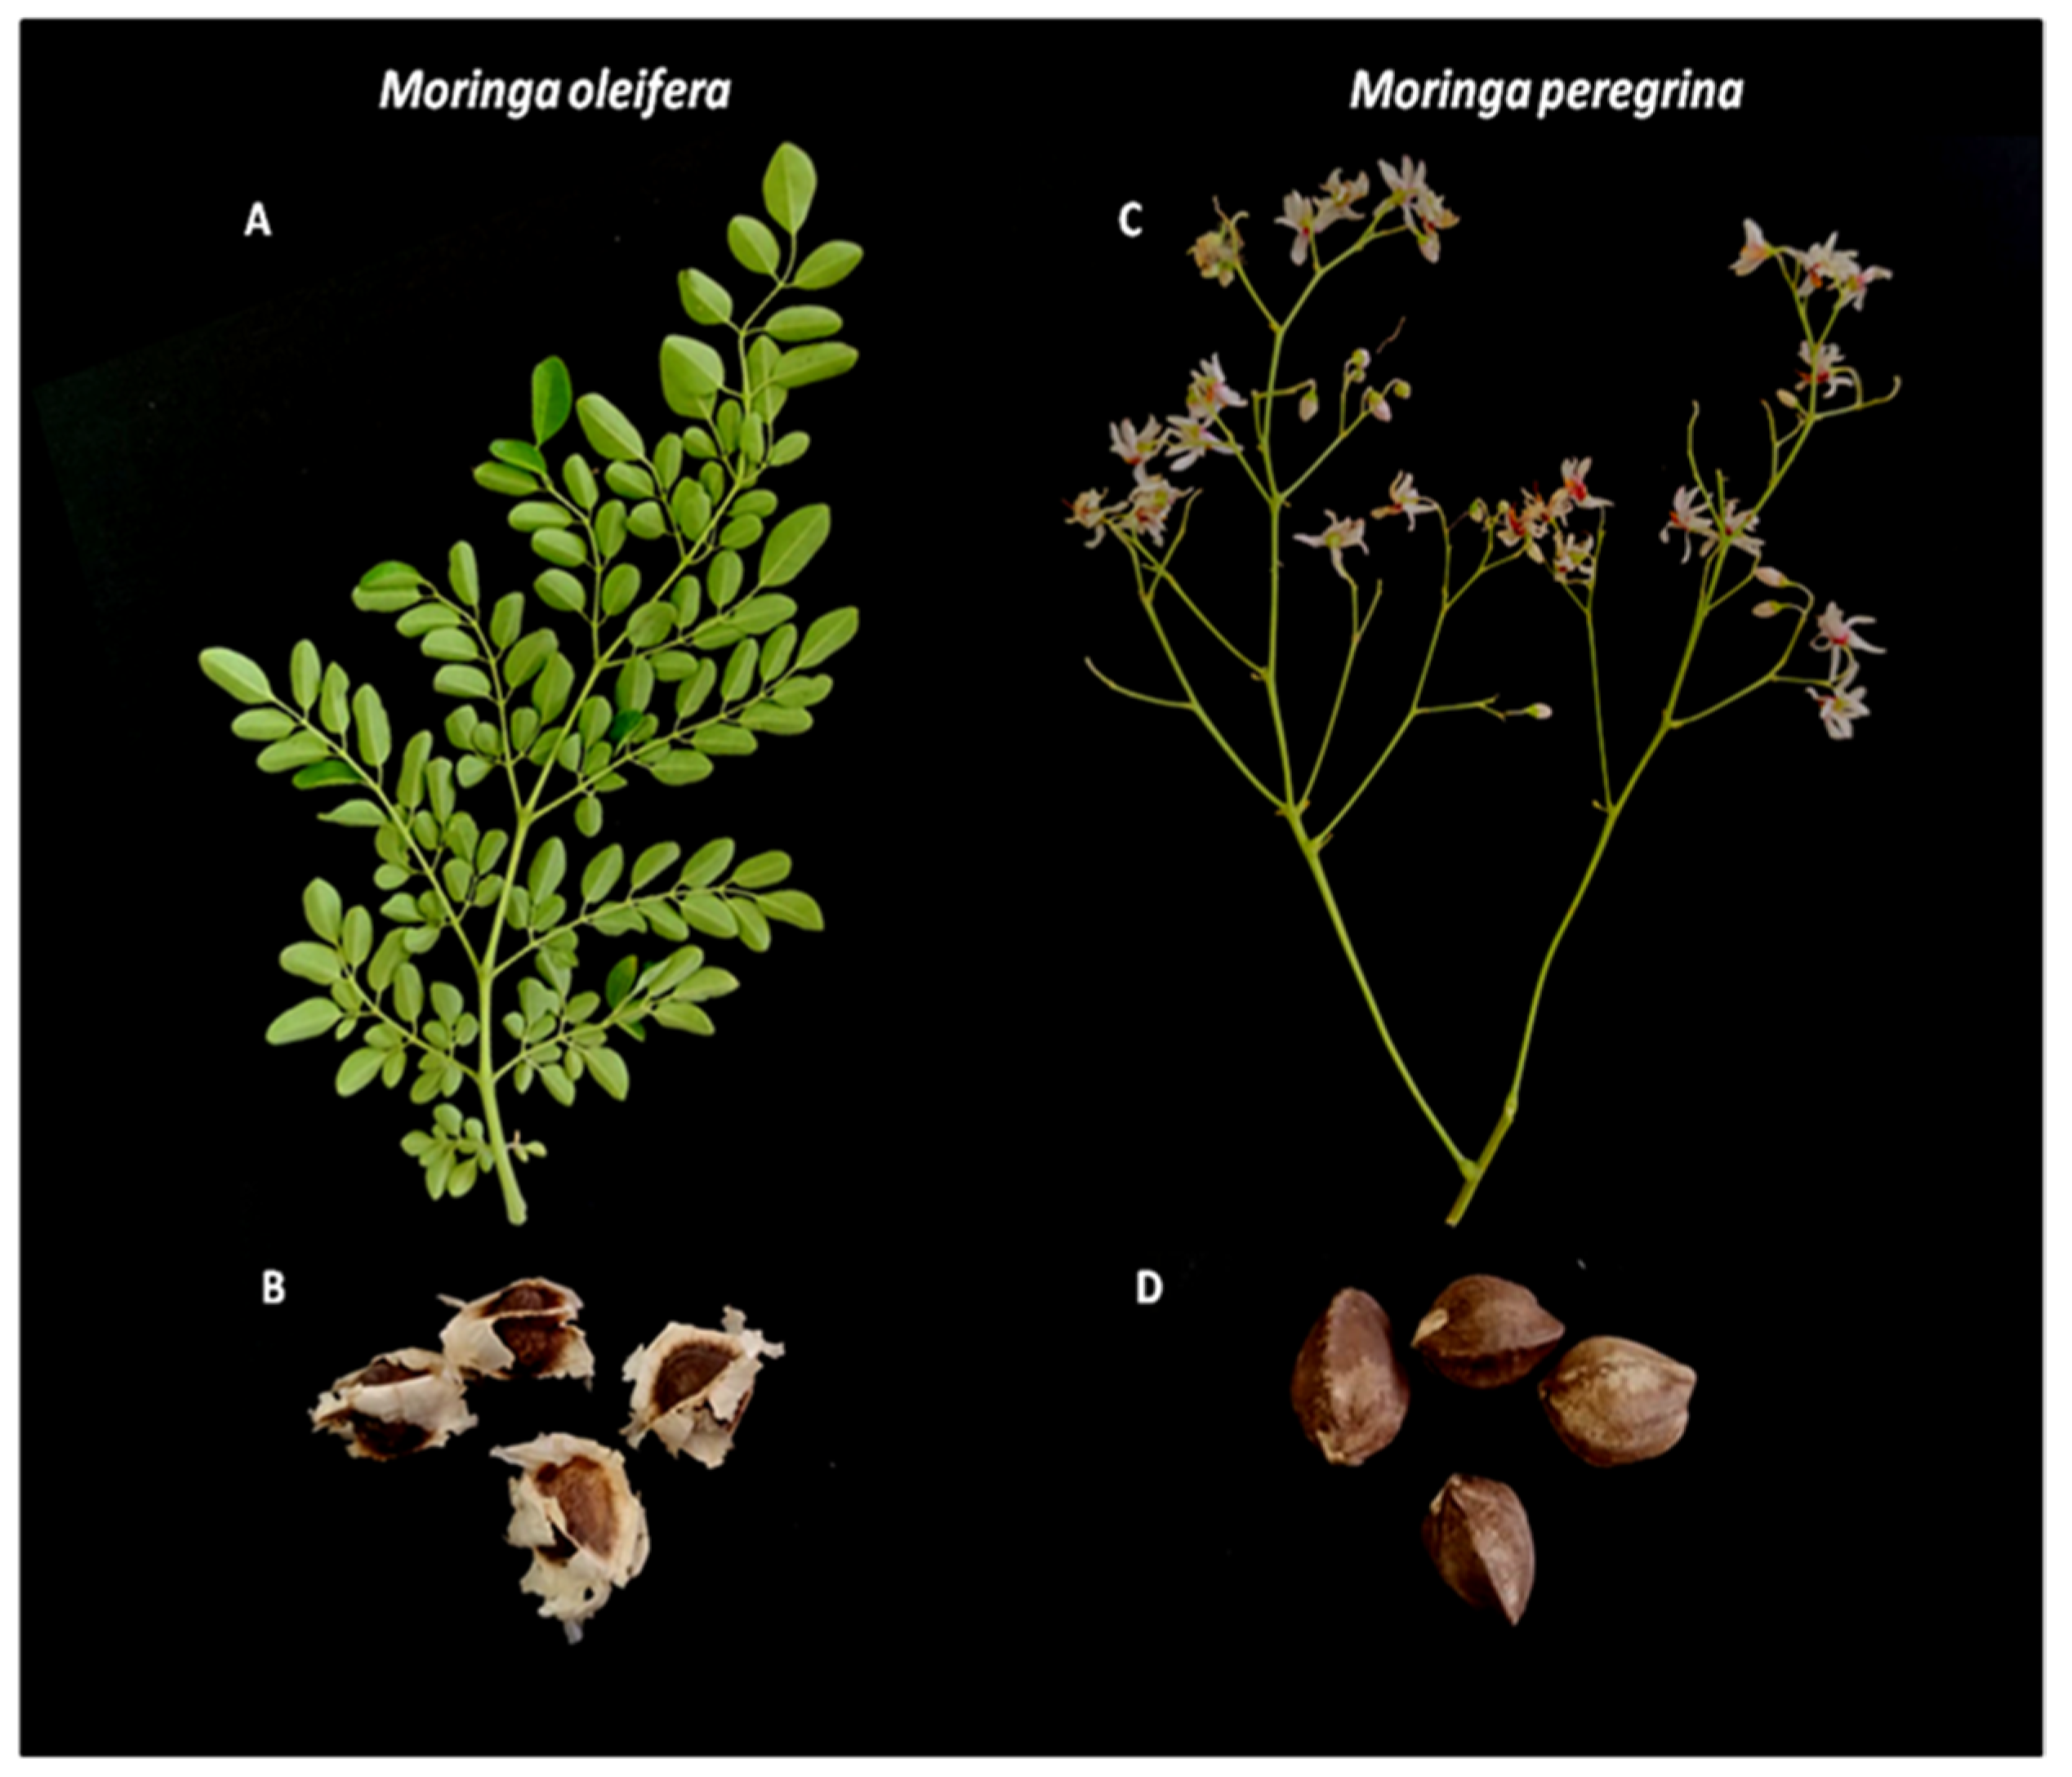 Horticulturae | Free Full-Text | Characterization of Phytochemical and  Nutrient Compounds from the Leaves and Seeds of Moringa oleifera and Moringa  peregrina